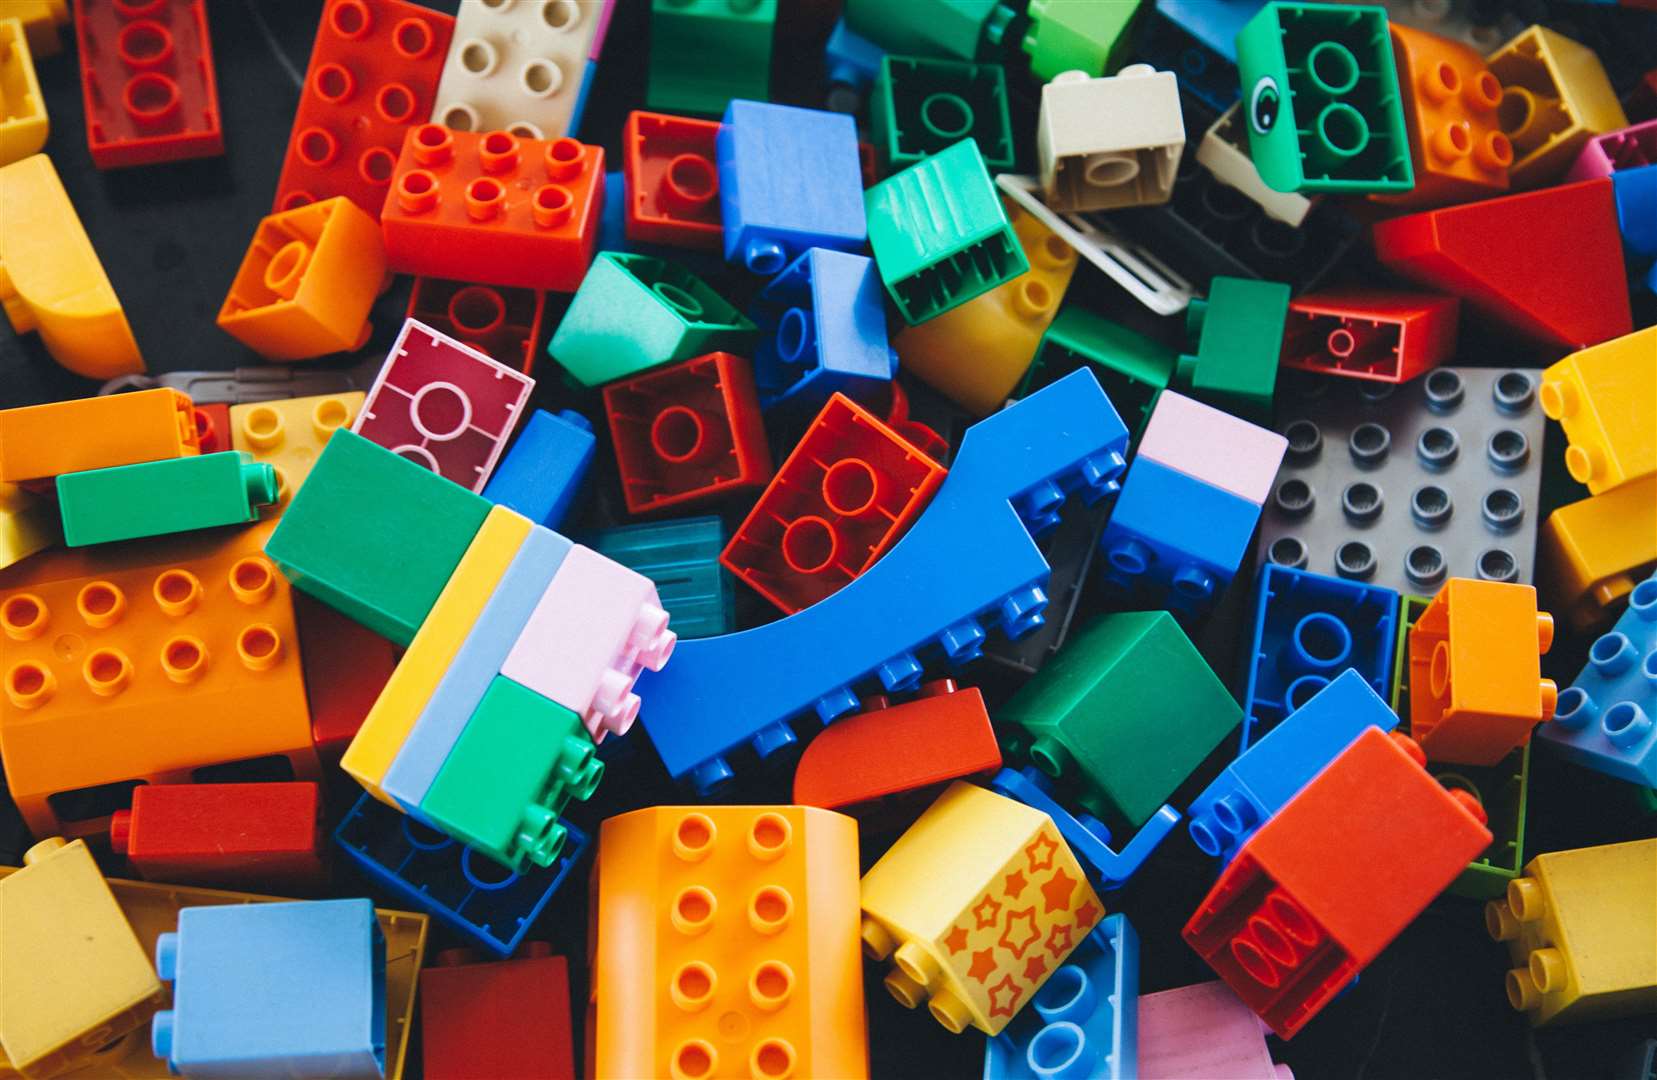 Lego has appeared on the list a number of times. Image: iStock.